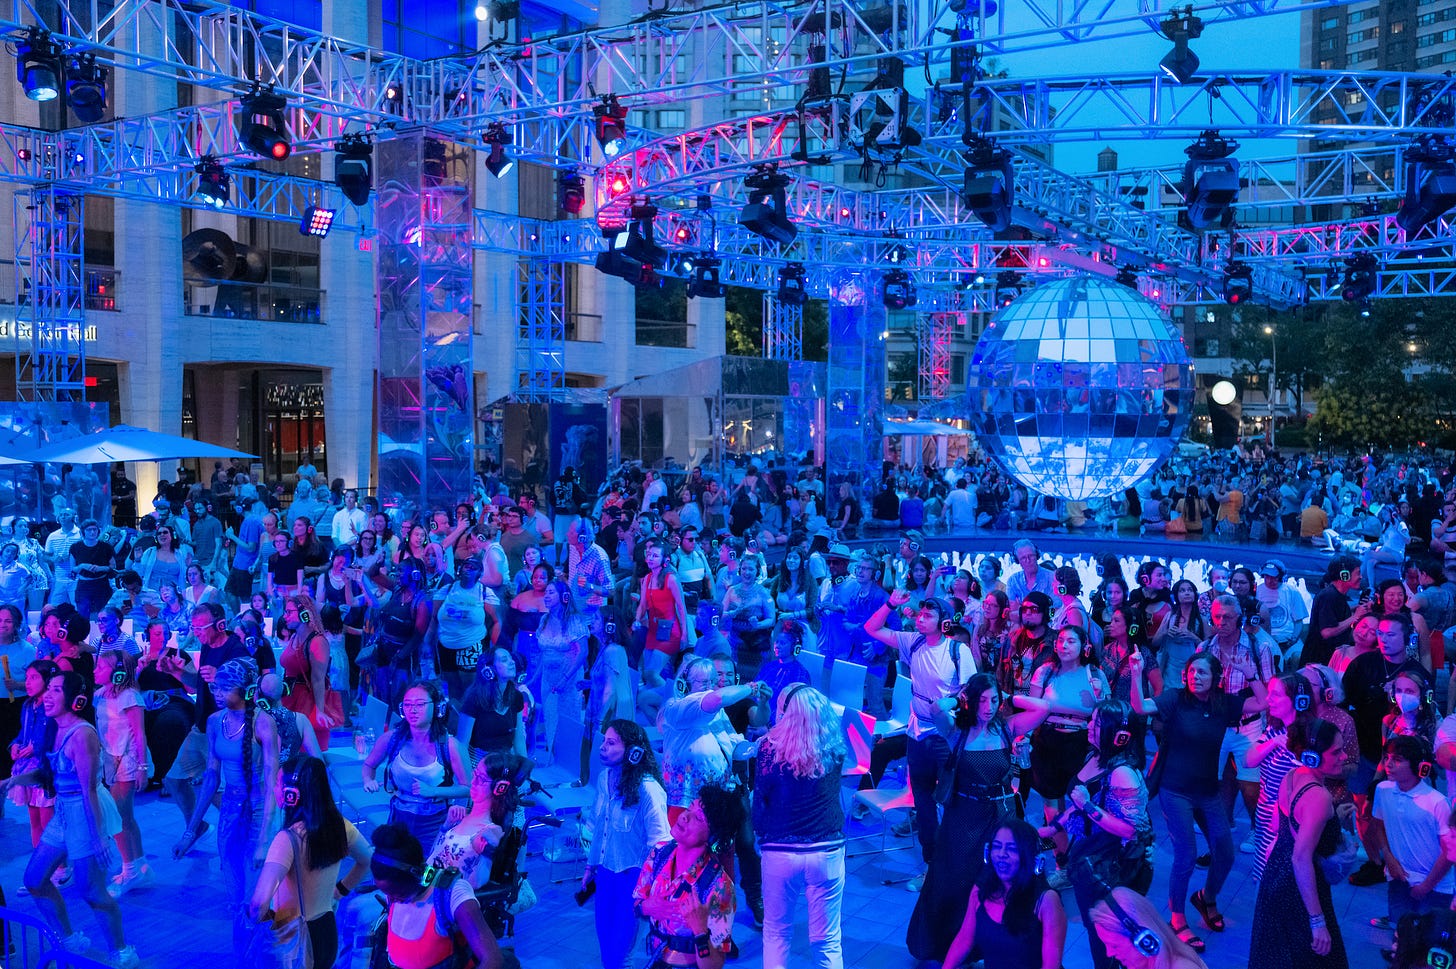 A photo of a huge outdoor dance floor with people wearing headsets and haptic suits, bathed in blue. A 10 foot tall disco ball spins over bubbling fountains.